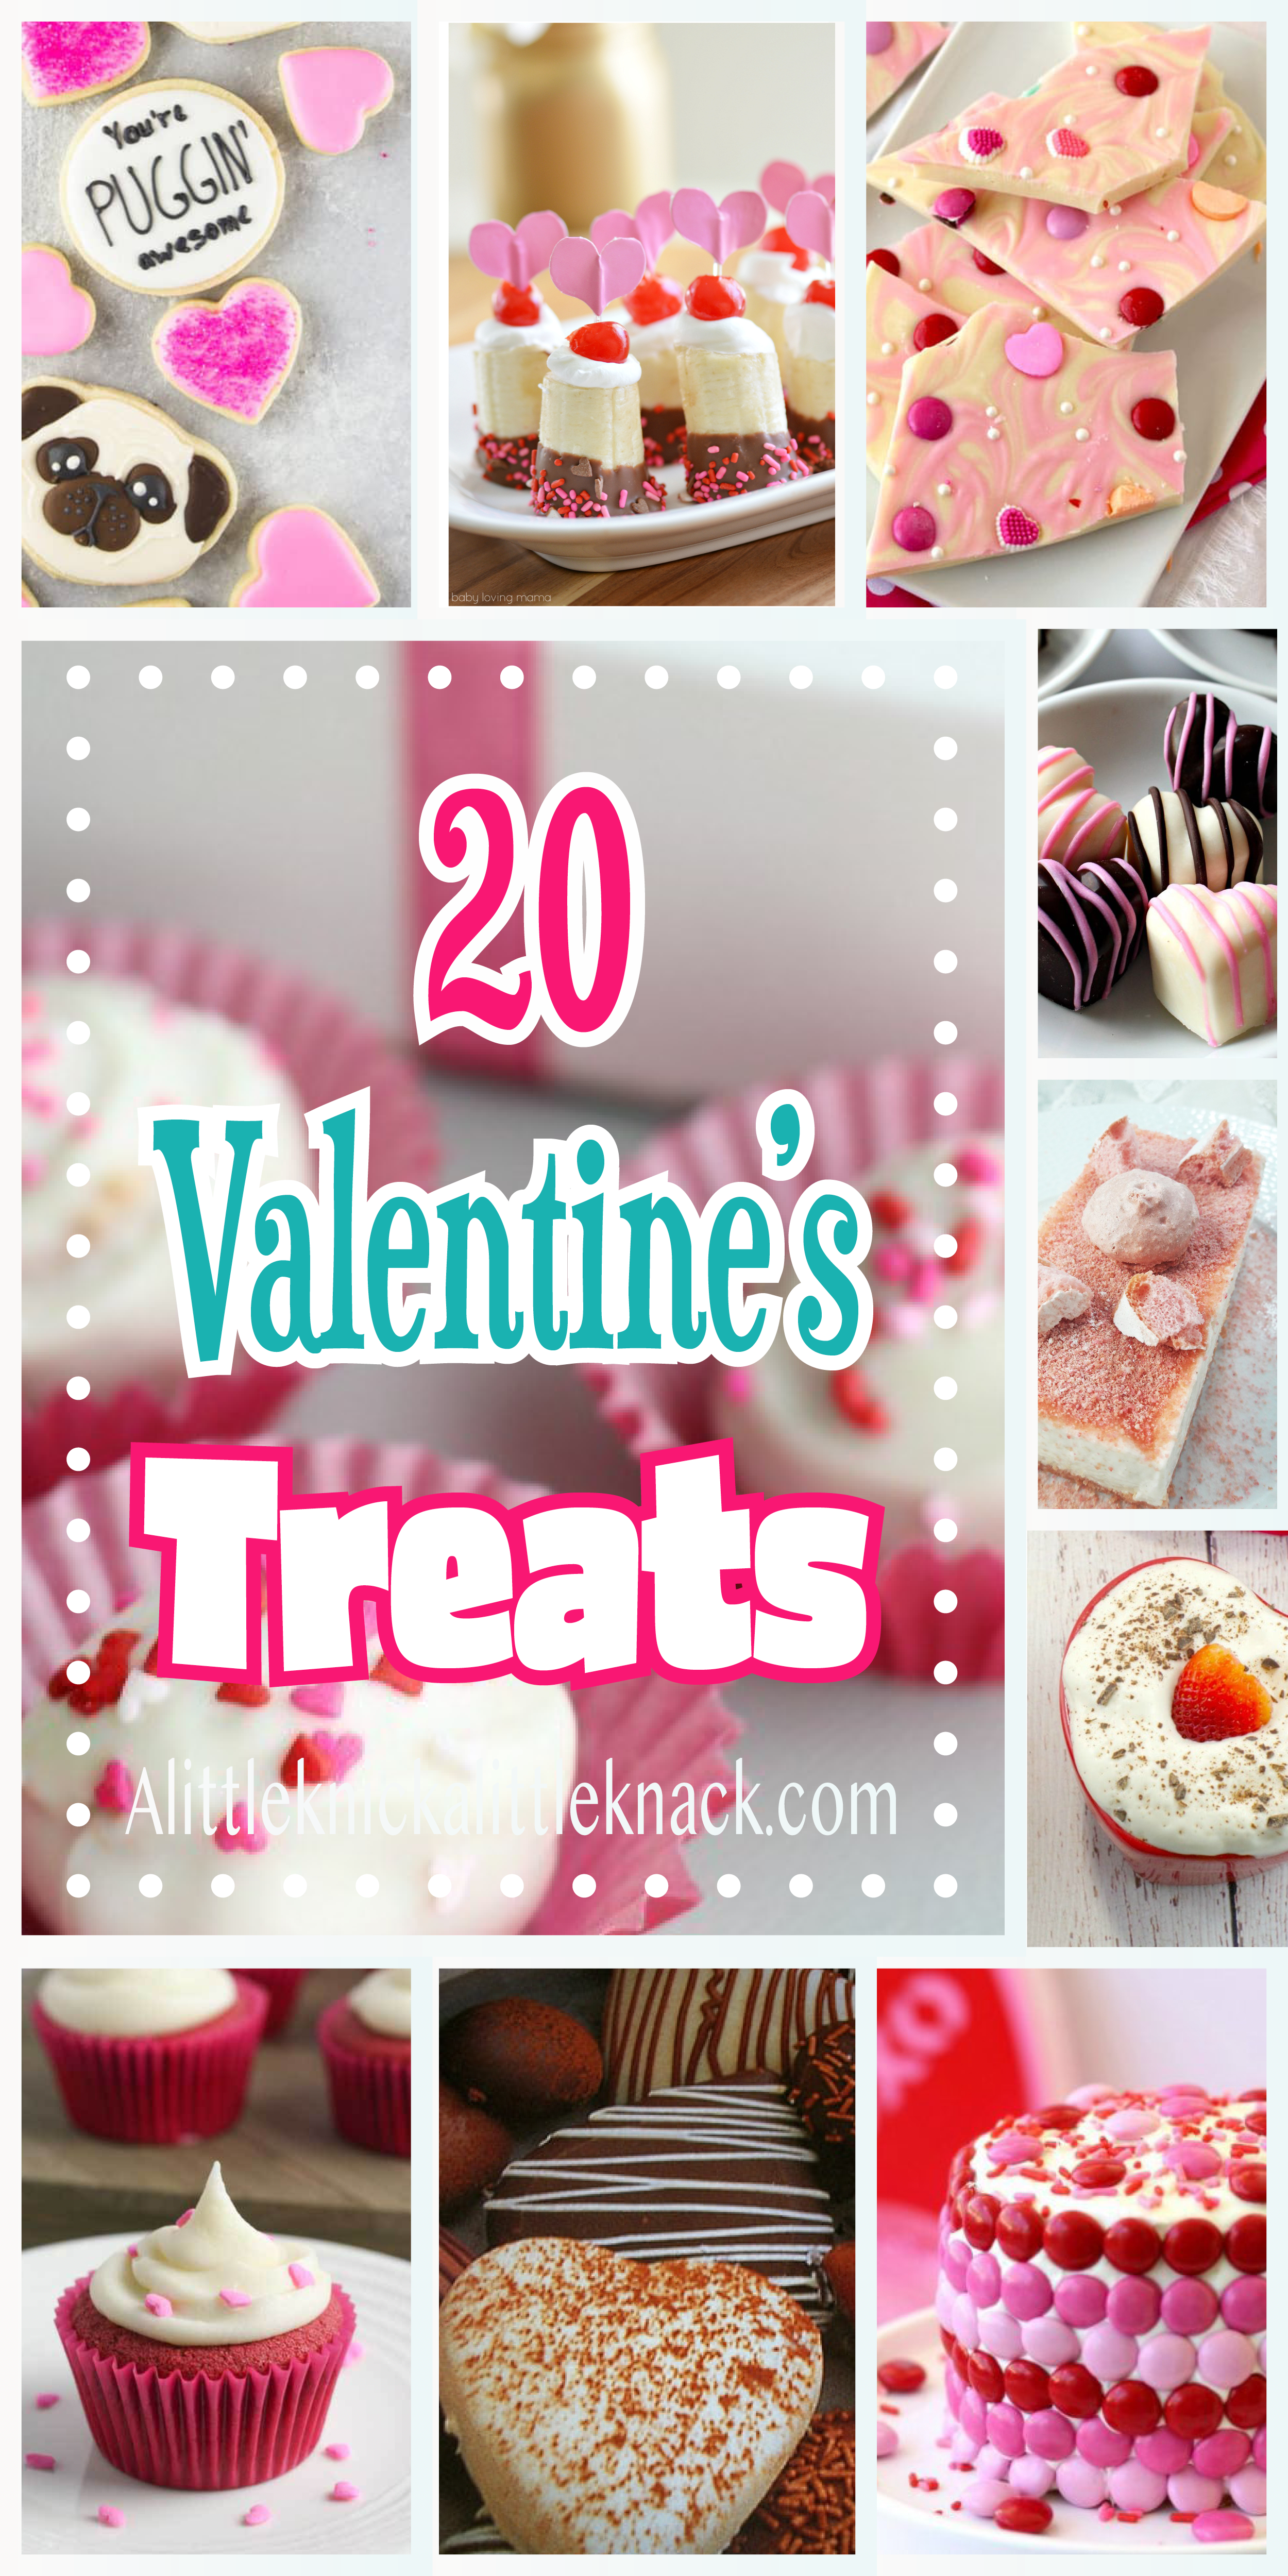 Make your Valentine’s day a bit sweeter with these delicious DIY treats! #Valentinesday